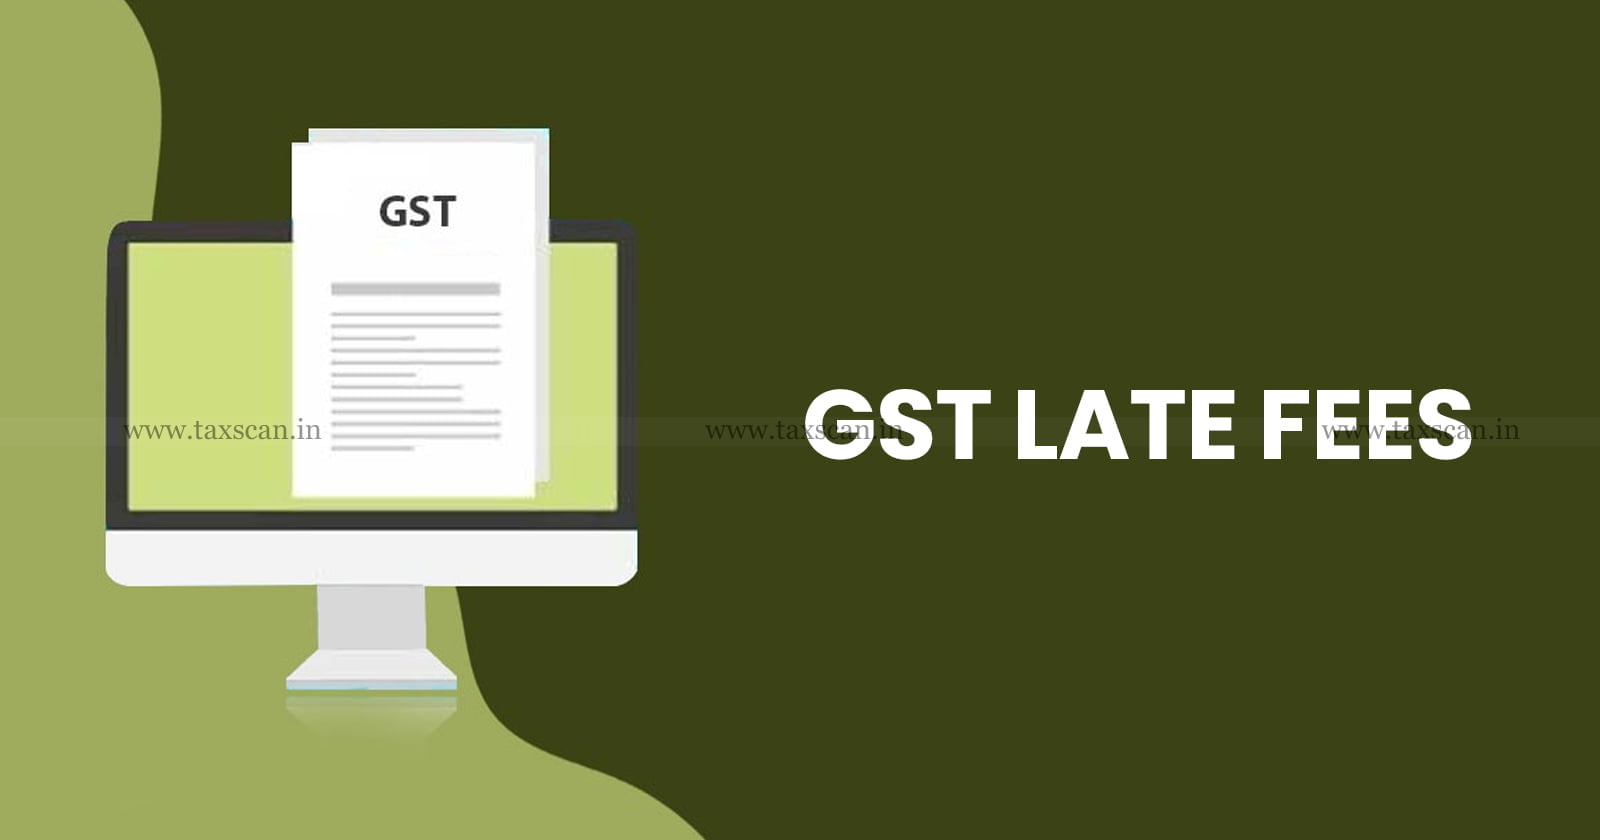 Rajasthan GST Department - GST Department - Guidelines - GST - Refund - Late Fee - Deposit - RGST Act - Taxscan